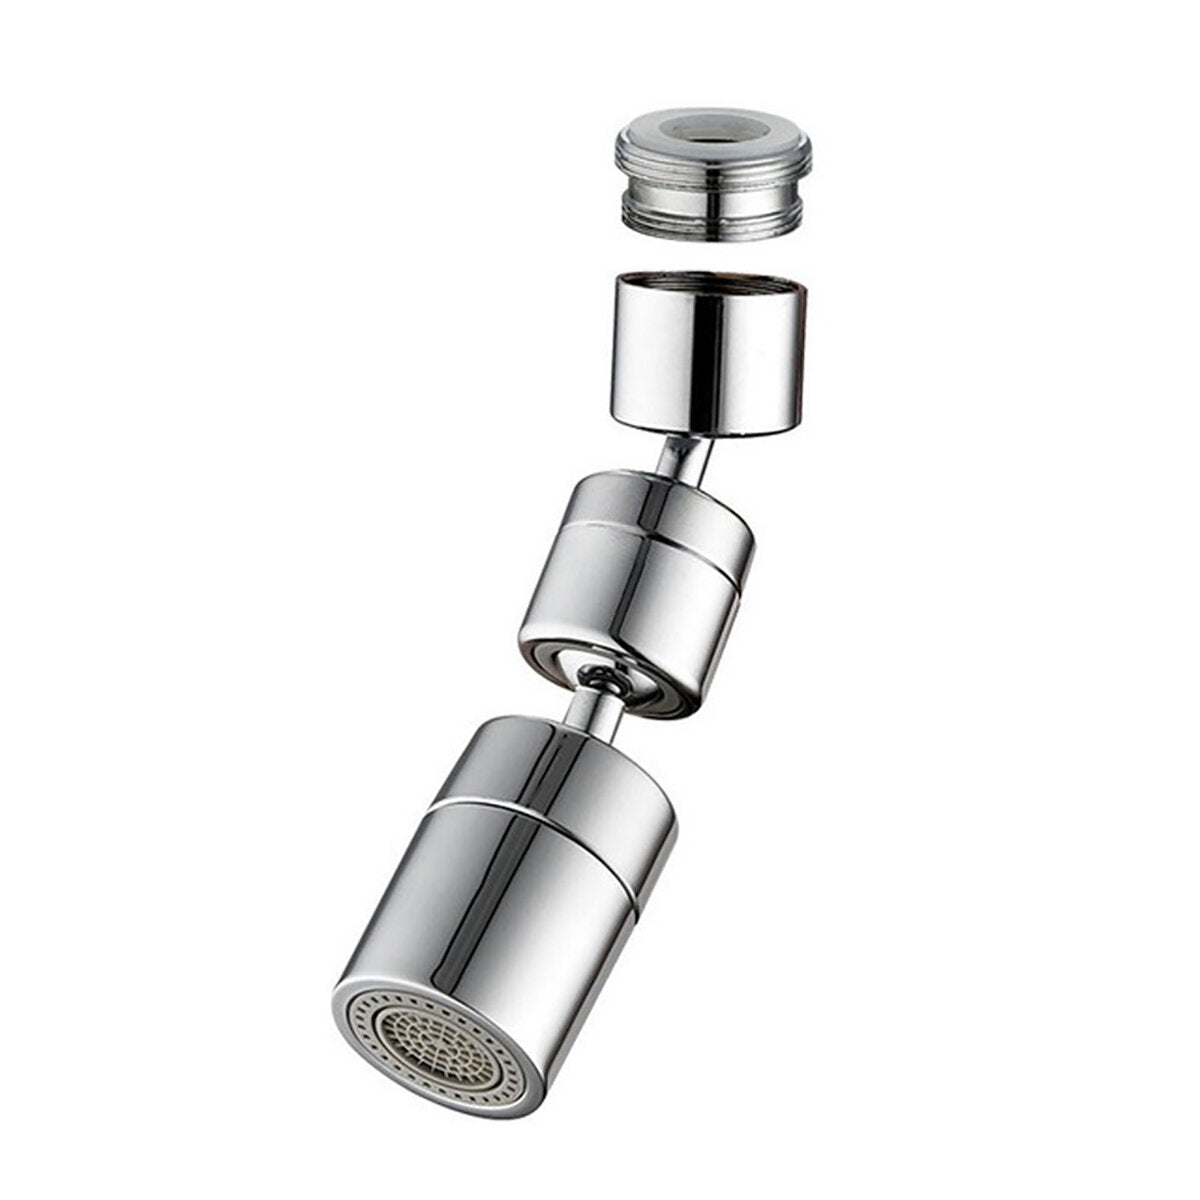 Sink Faucet Aerator 1080 Degree Swivel Universal Splash Filter Faucets Extender Bubbler Attachment For Eye Flush Face Wash And Gargle